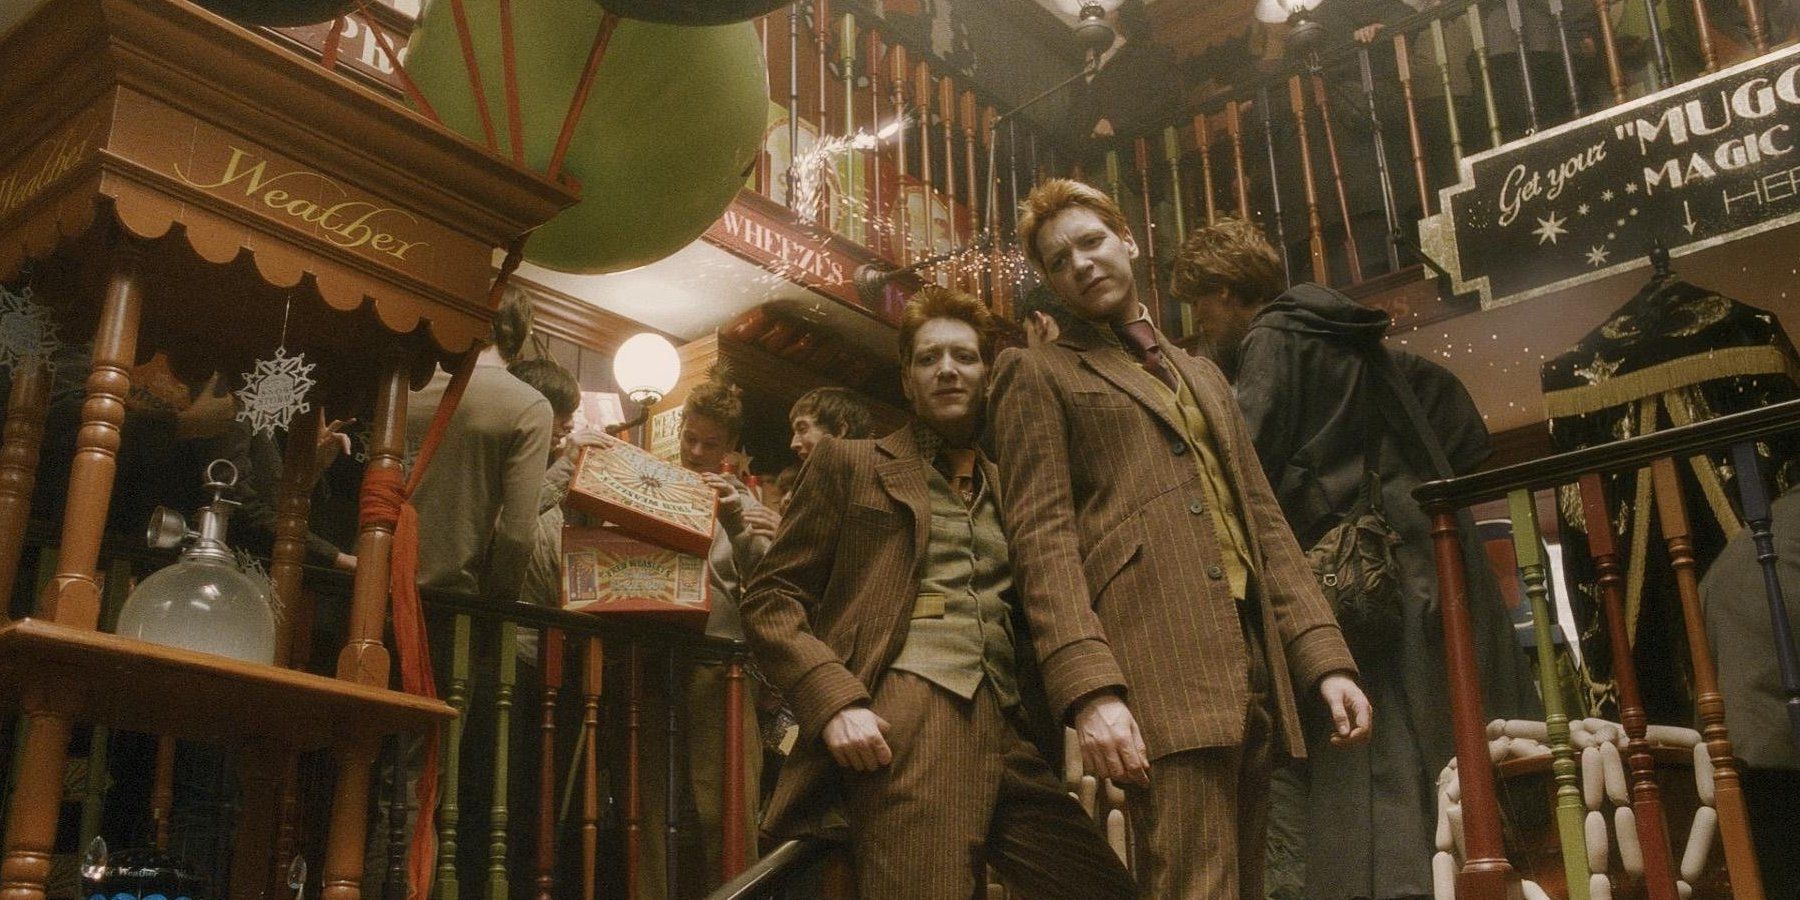 Harry Potter Fred and George Weasley at Weasleys Wizard Wheezes in Diagon Alley